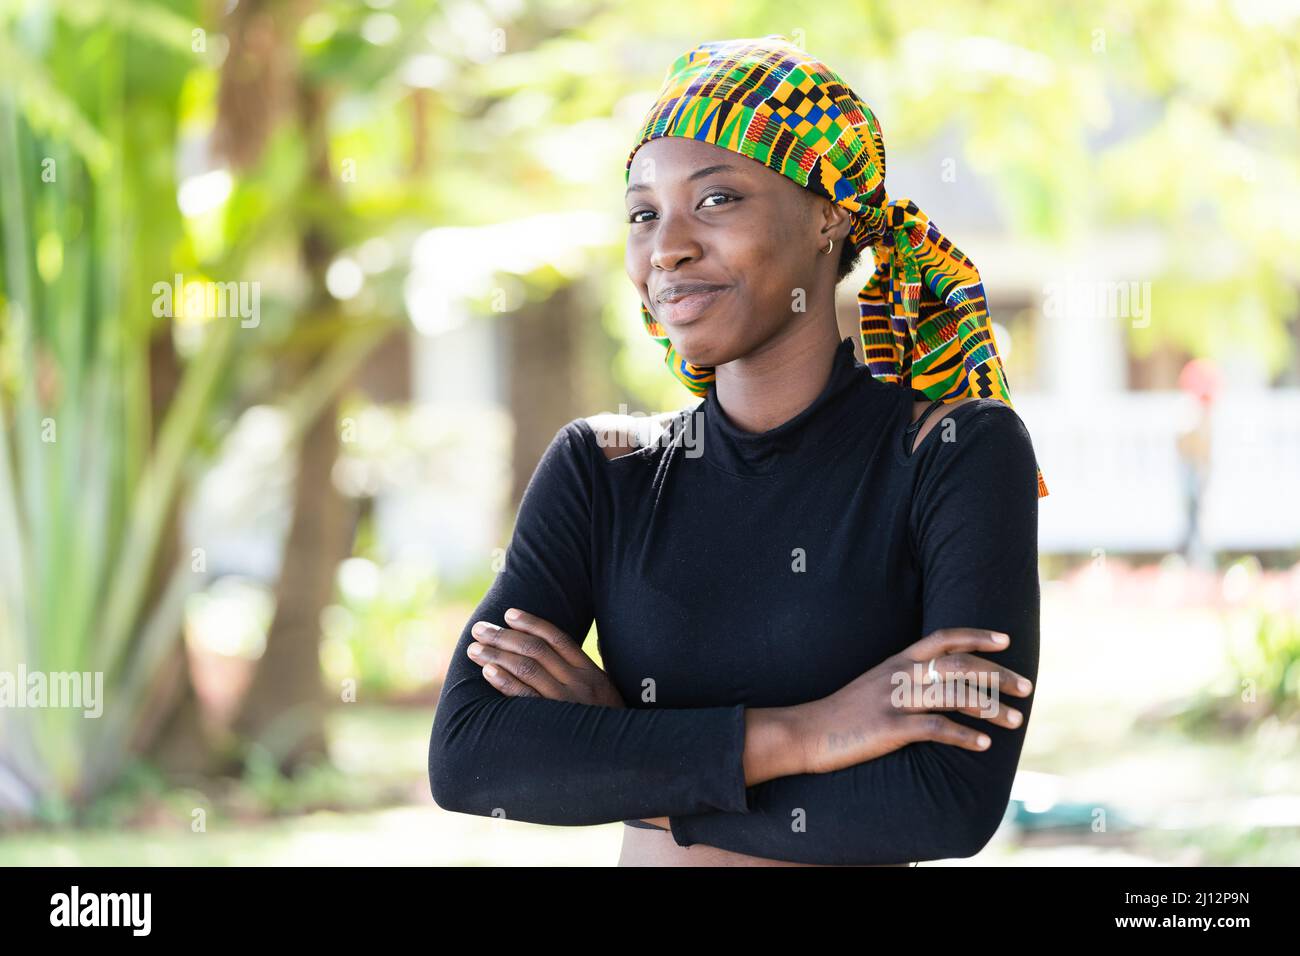 Smart young African beauty wearing a colorful, knotted scarf on her head and a black turtleneck sweater, smiling mischievously at the camera; symboliz Stock Photo